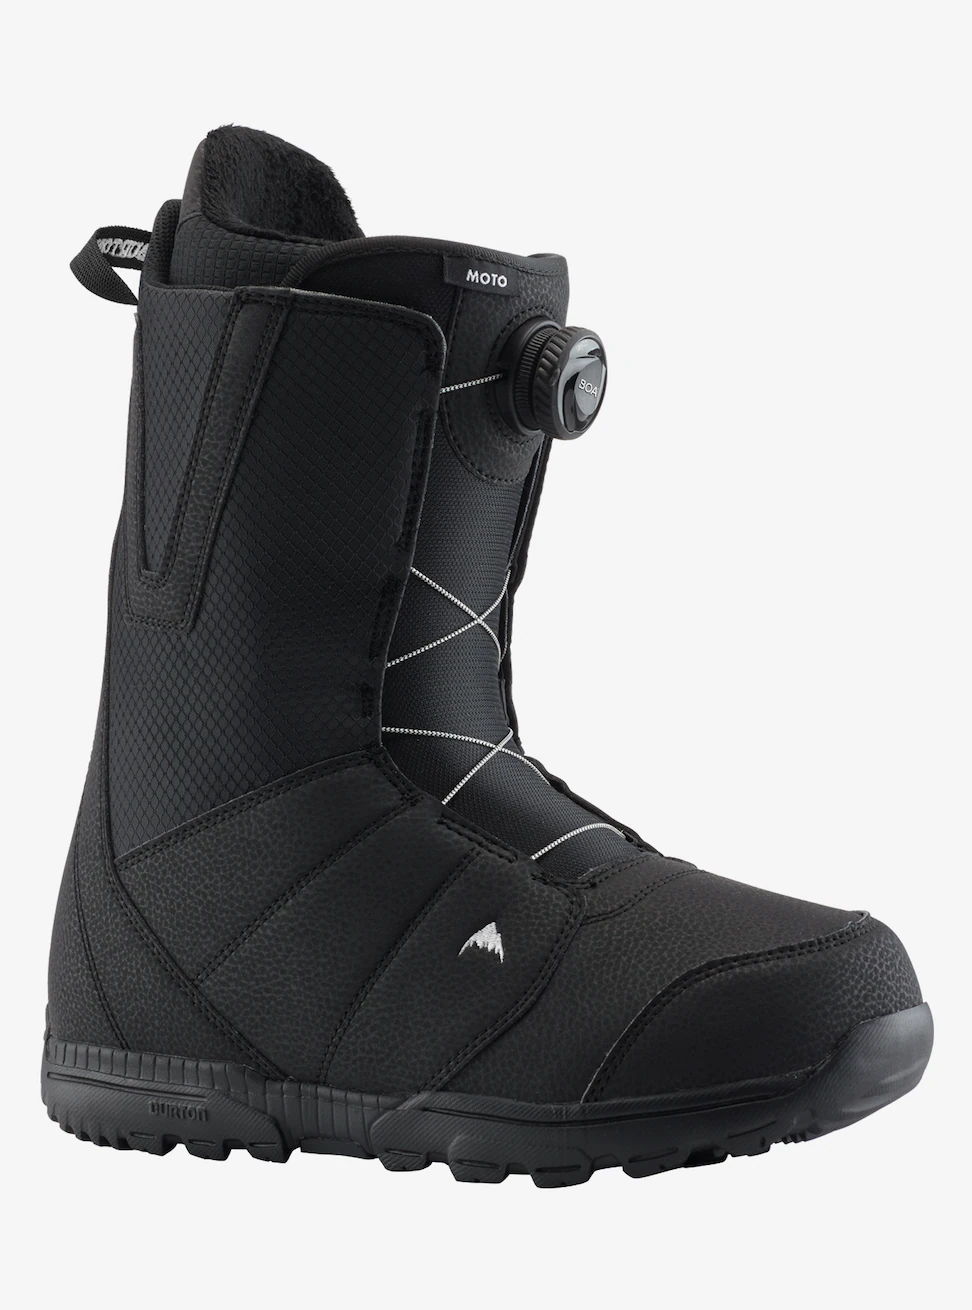 2024 Moto Boa Snowboard Boot - Shop Online with Algonquin Outfitters